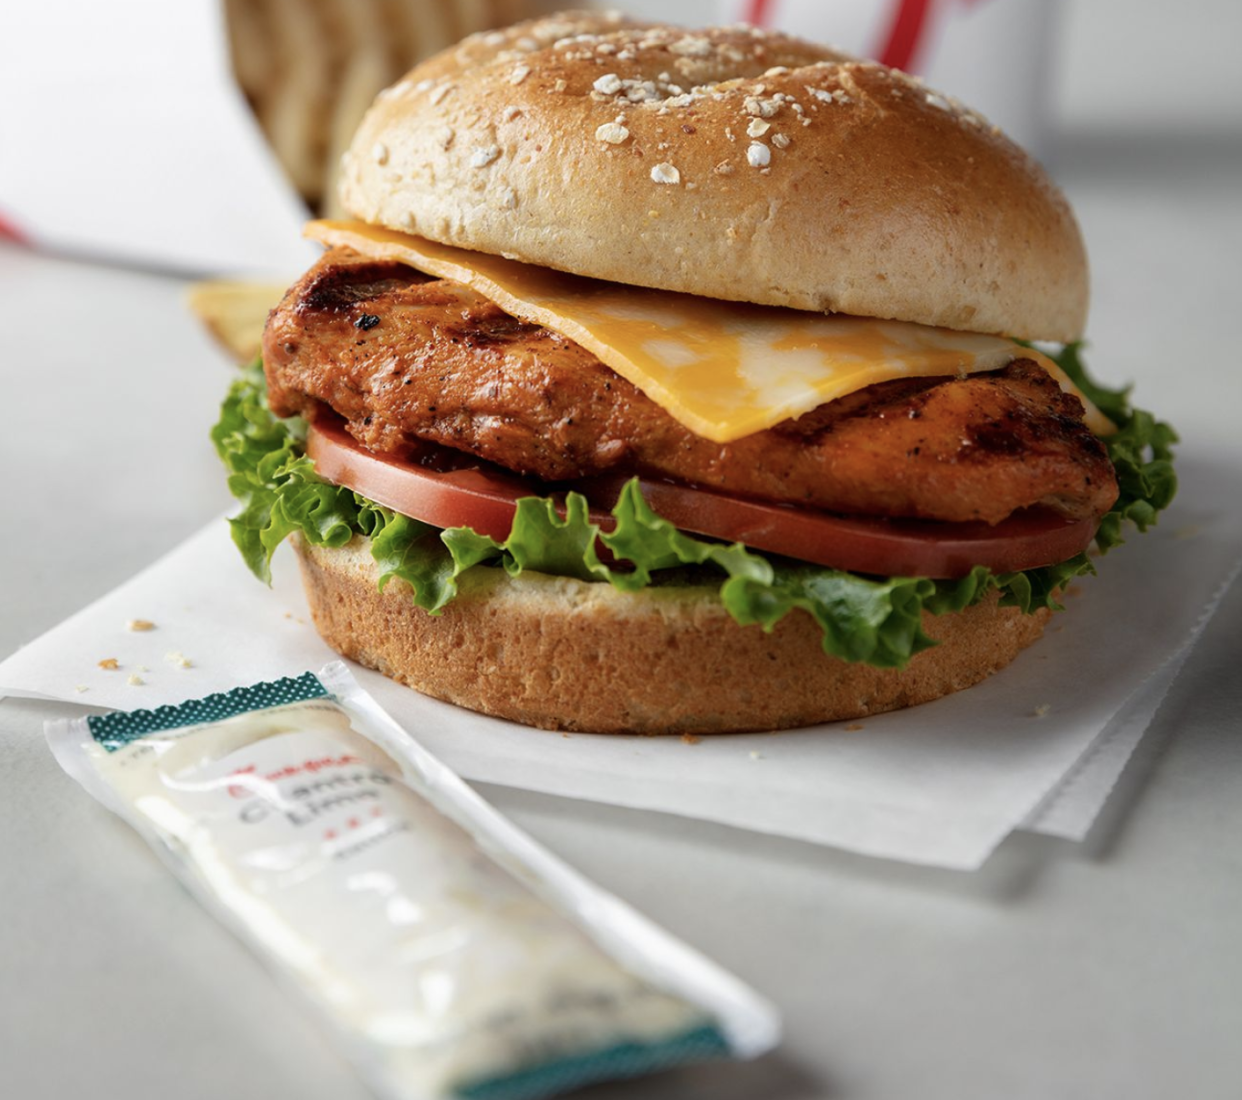 Chick-fil-A's Grilled Spicy Chicken Deluxe Sandwich (Courtesy: Chick-fil-A)